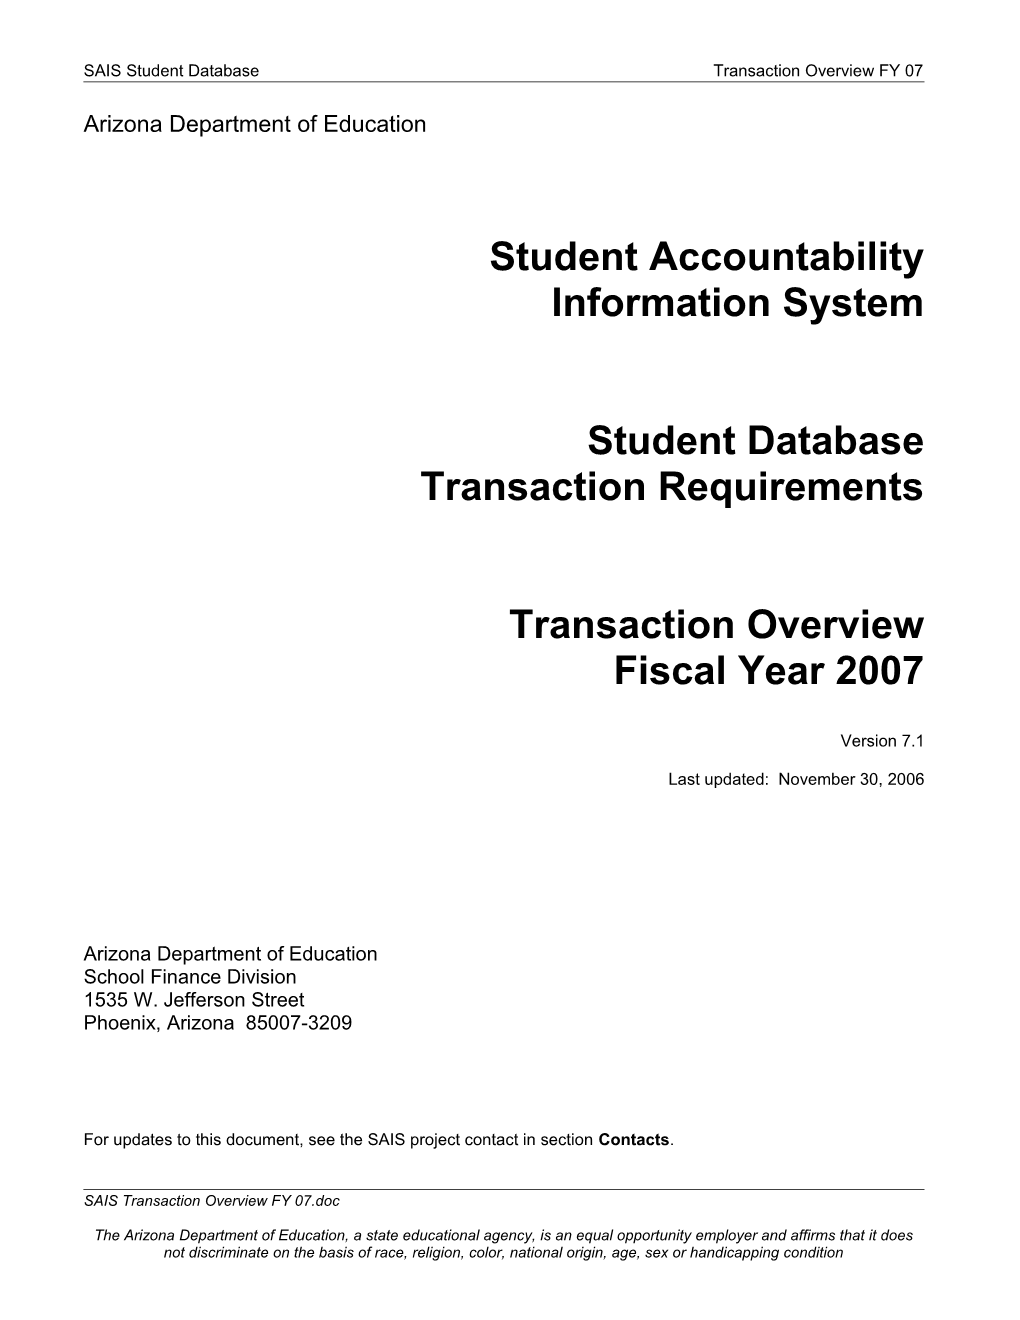 This Section Defines the Following Enrollment-Related Transactions